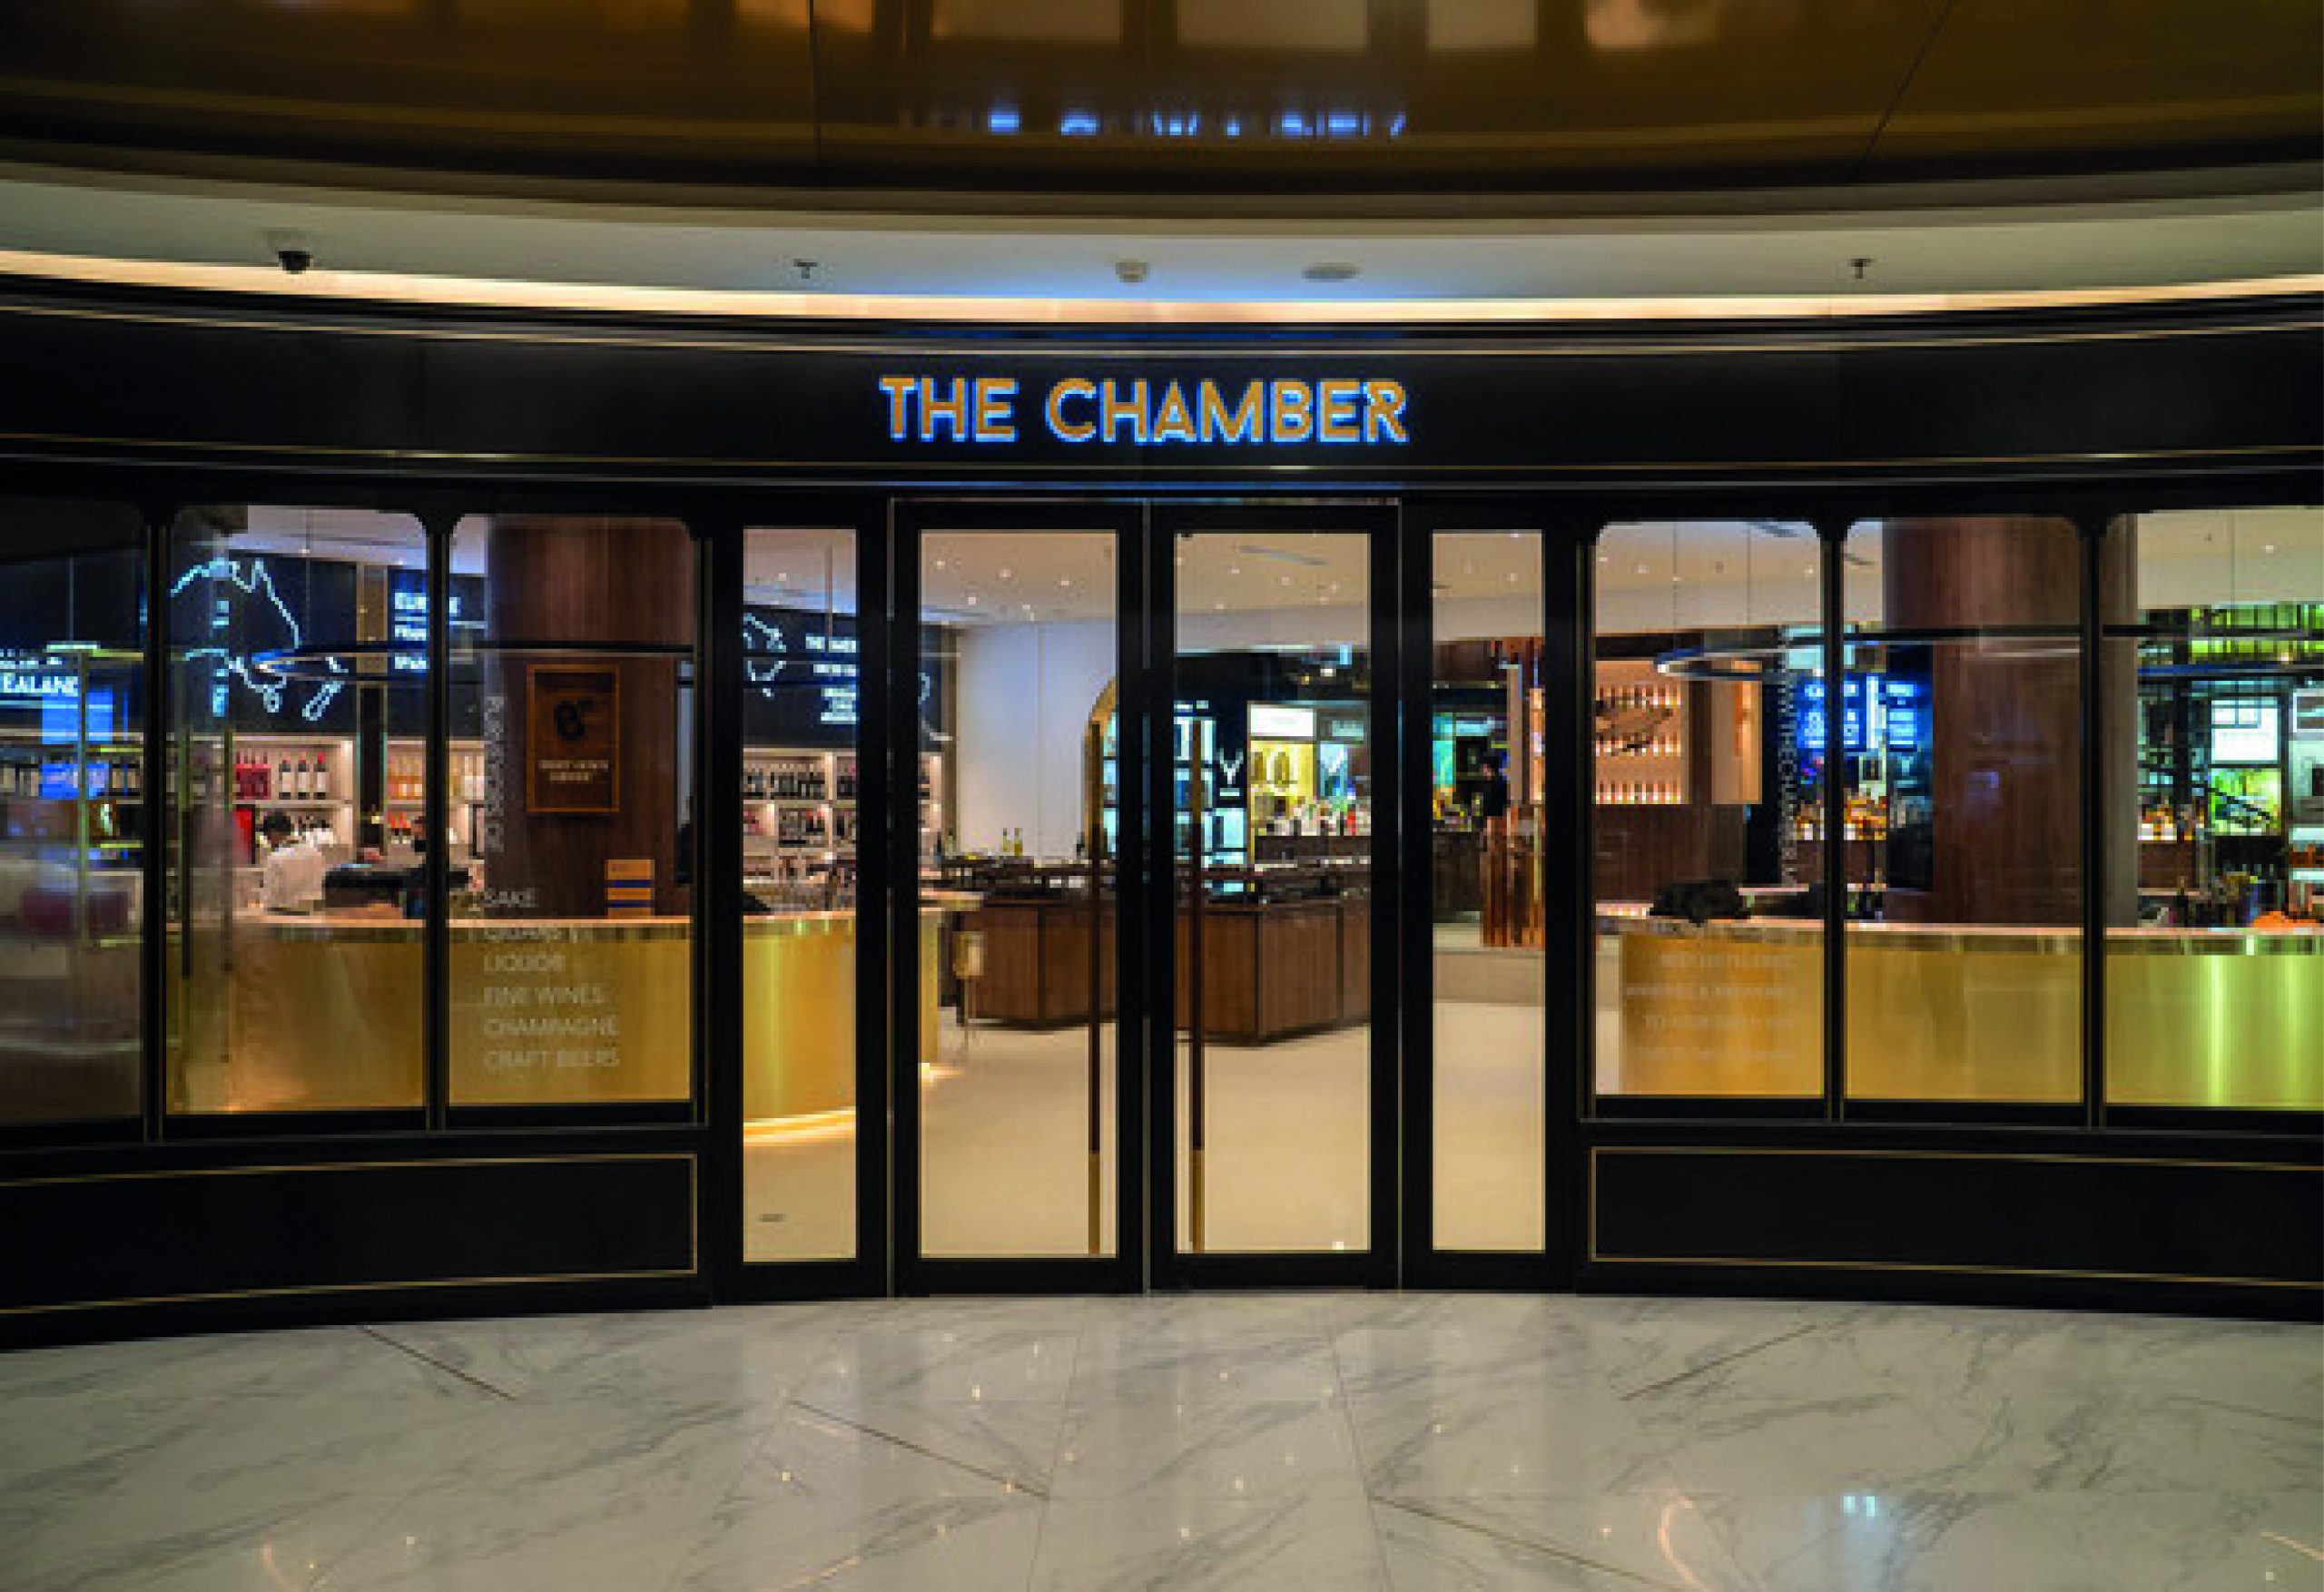 Discerning Decadence Lives at The Chamber